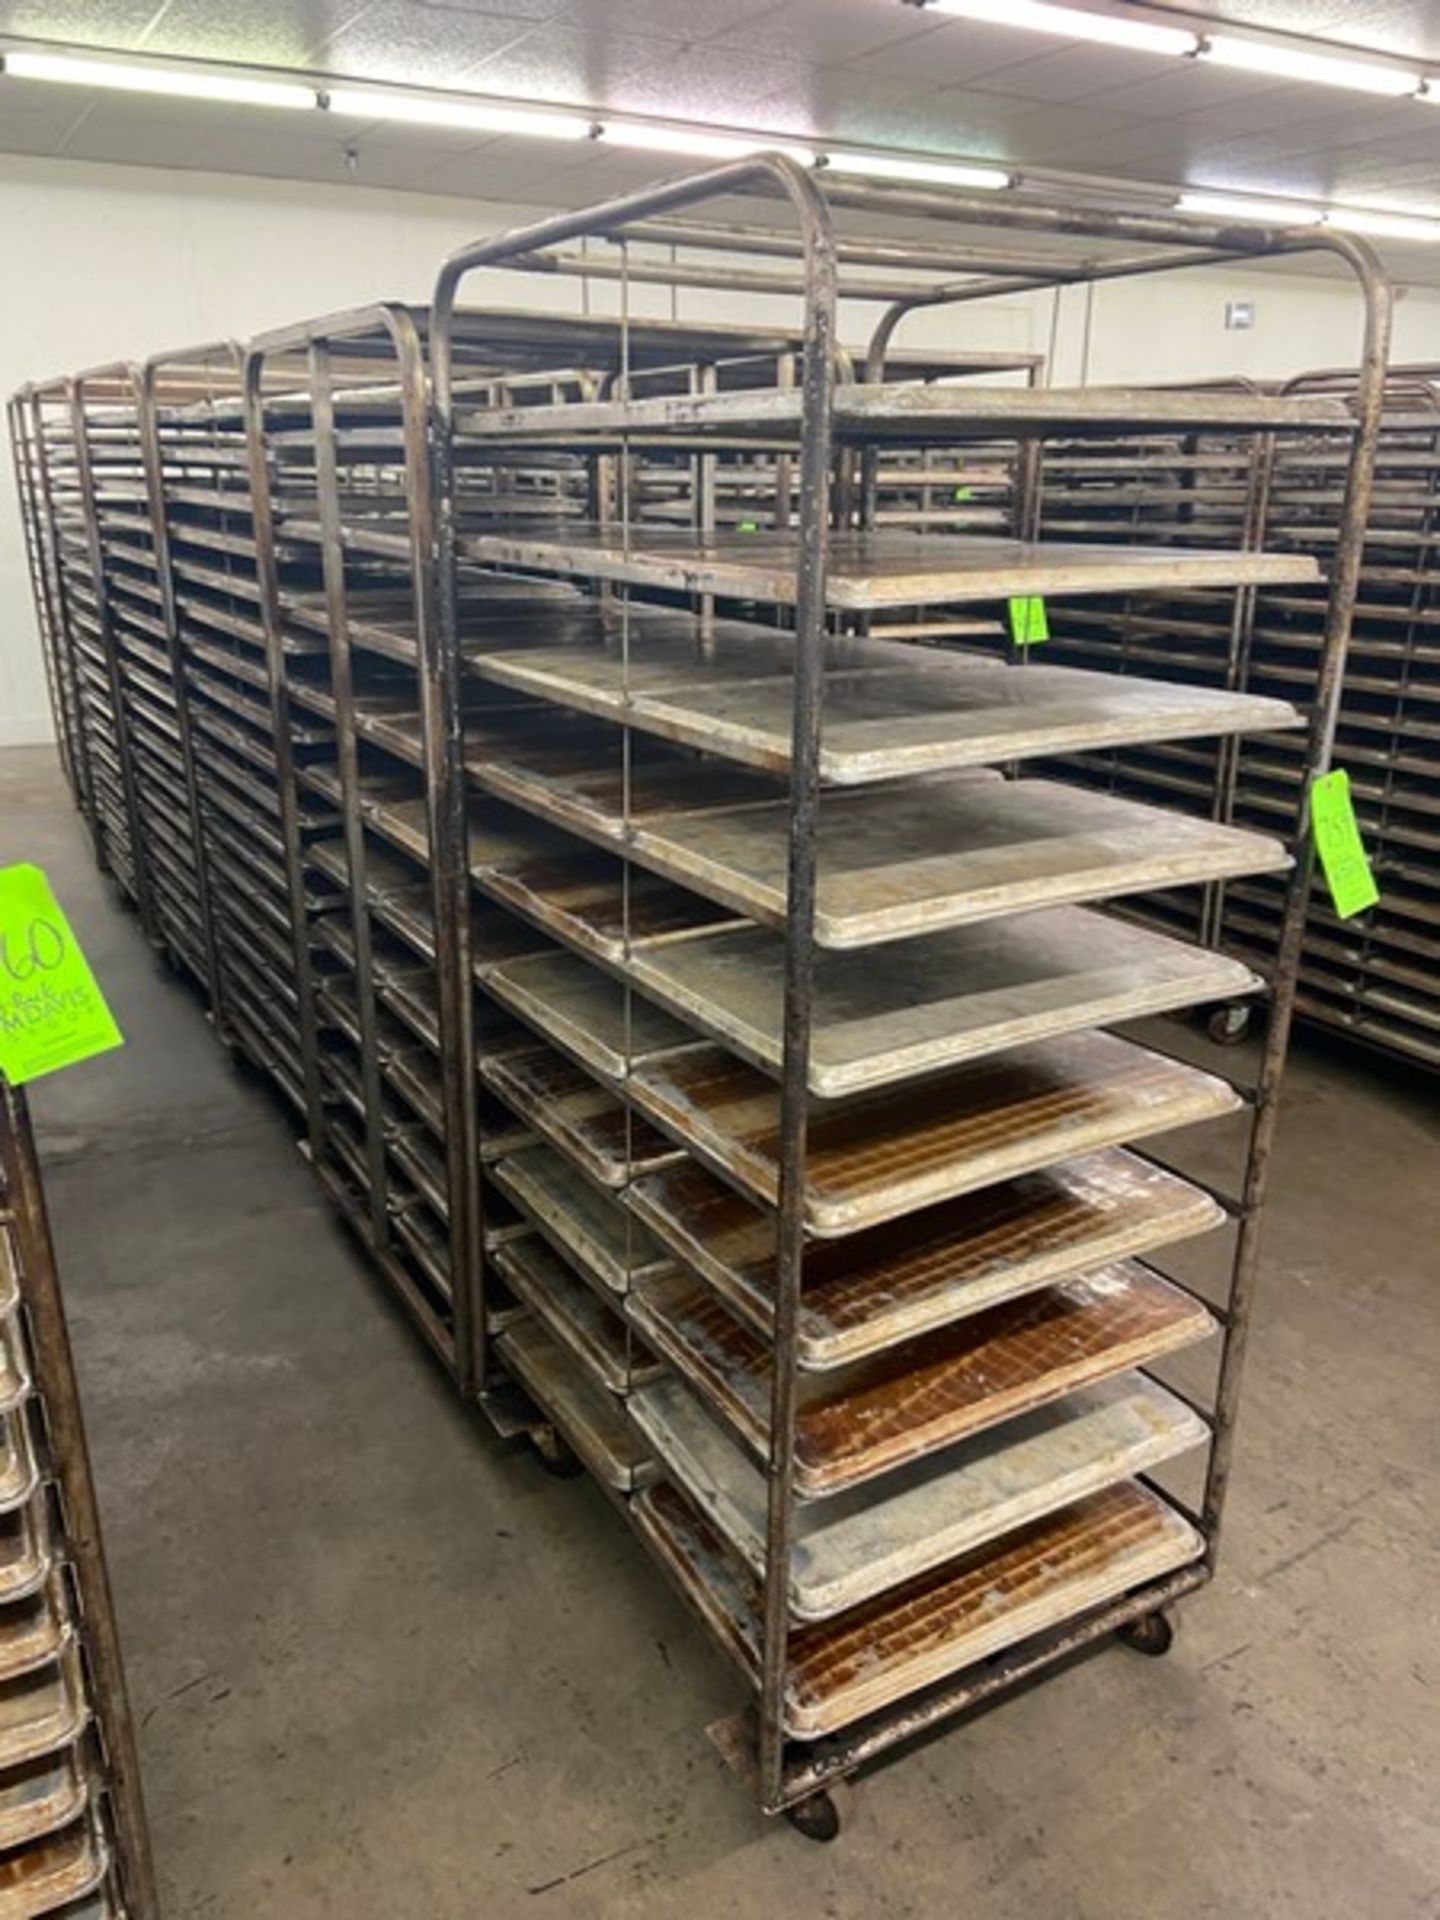 (7) PORTABLE DOUBLE SIDED BAKING PAN RACKS, MOUNTED ON CASTERS (LOCATED IN HERMITAGE, PA) - Bild 2 aus 3